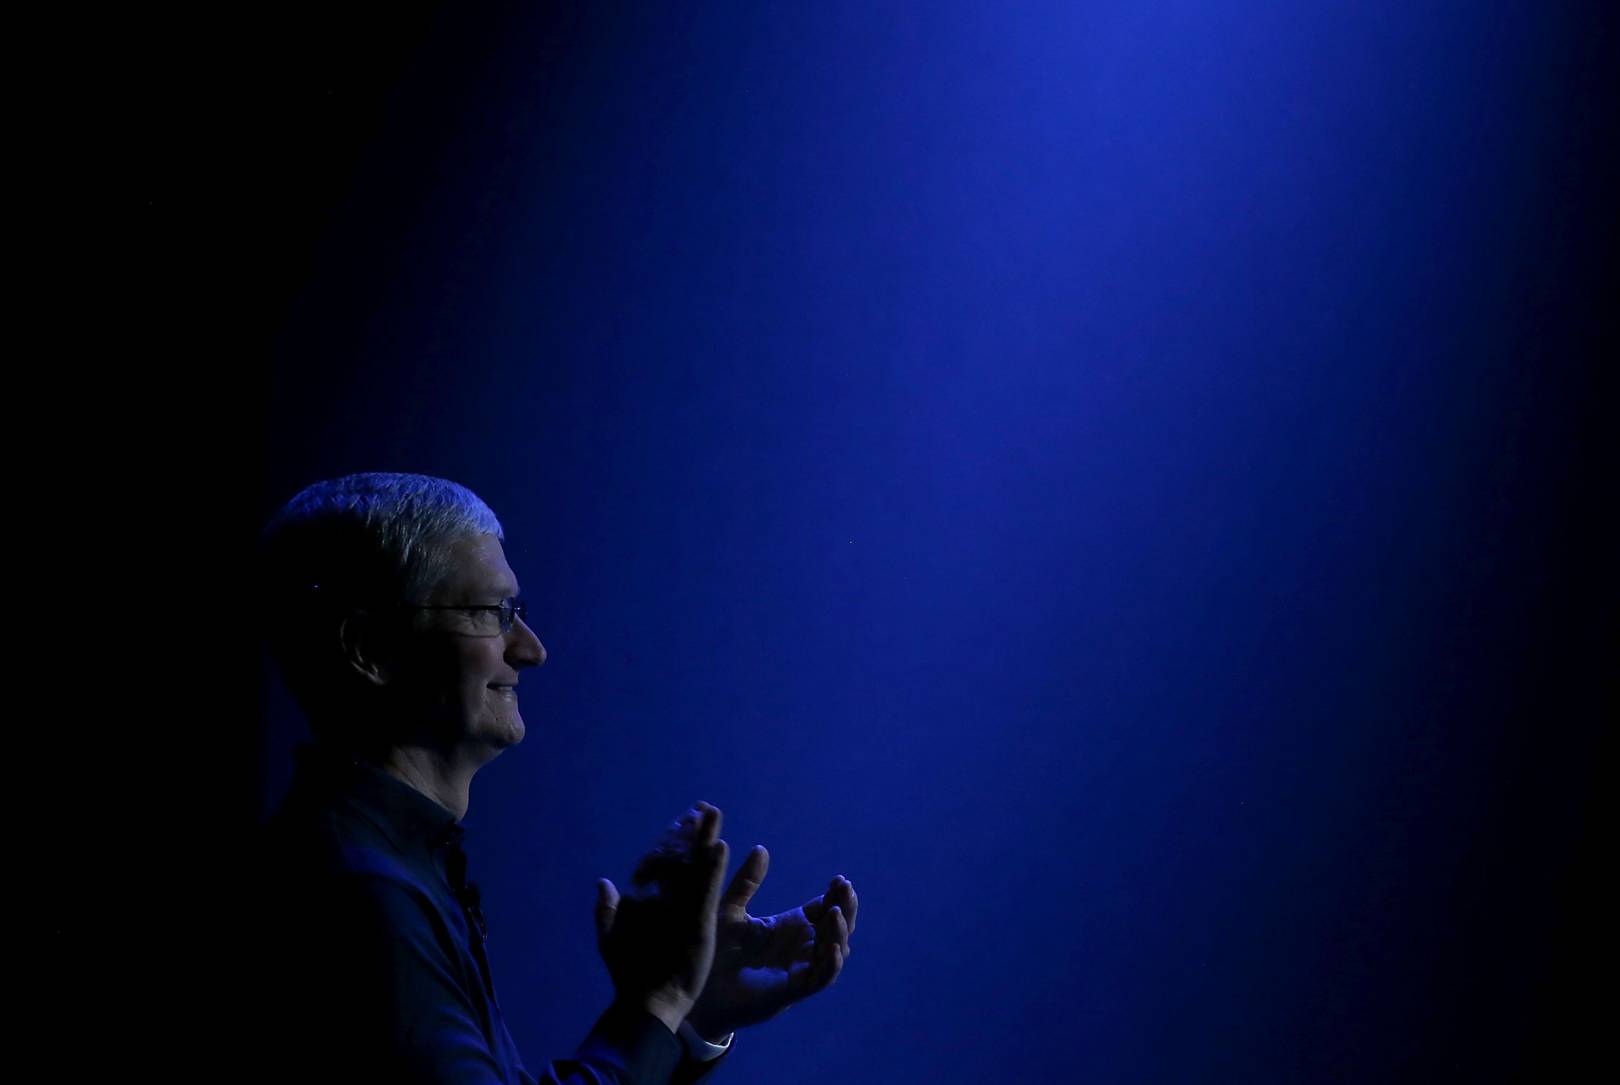 Apple is uncharacteristically opening up its artificial intelligence, but how smart is it?